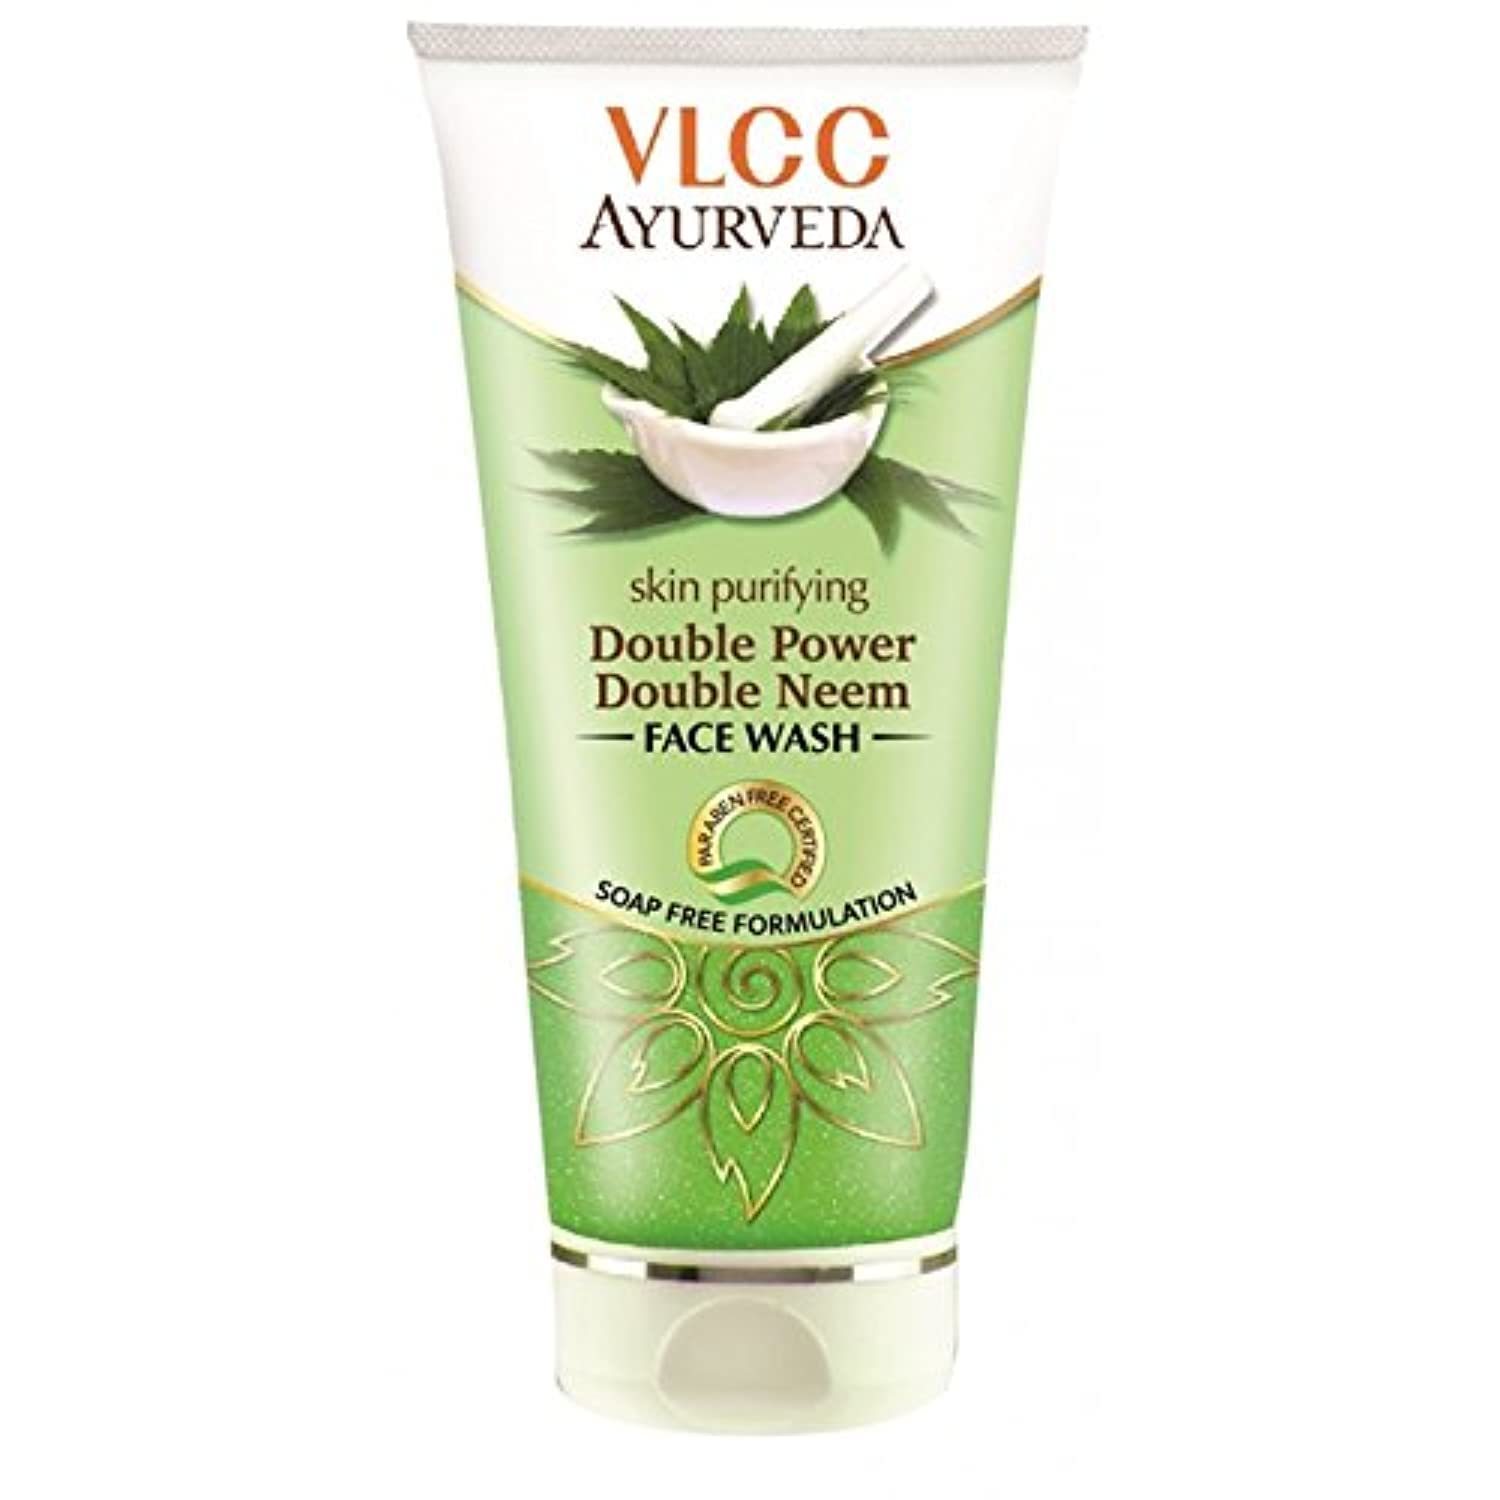 VLCC Ayurveda Skin Purifying Double Power Double Neem Facewash 100ml (pack of 2) - $16.03